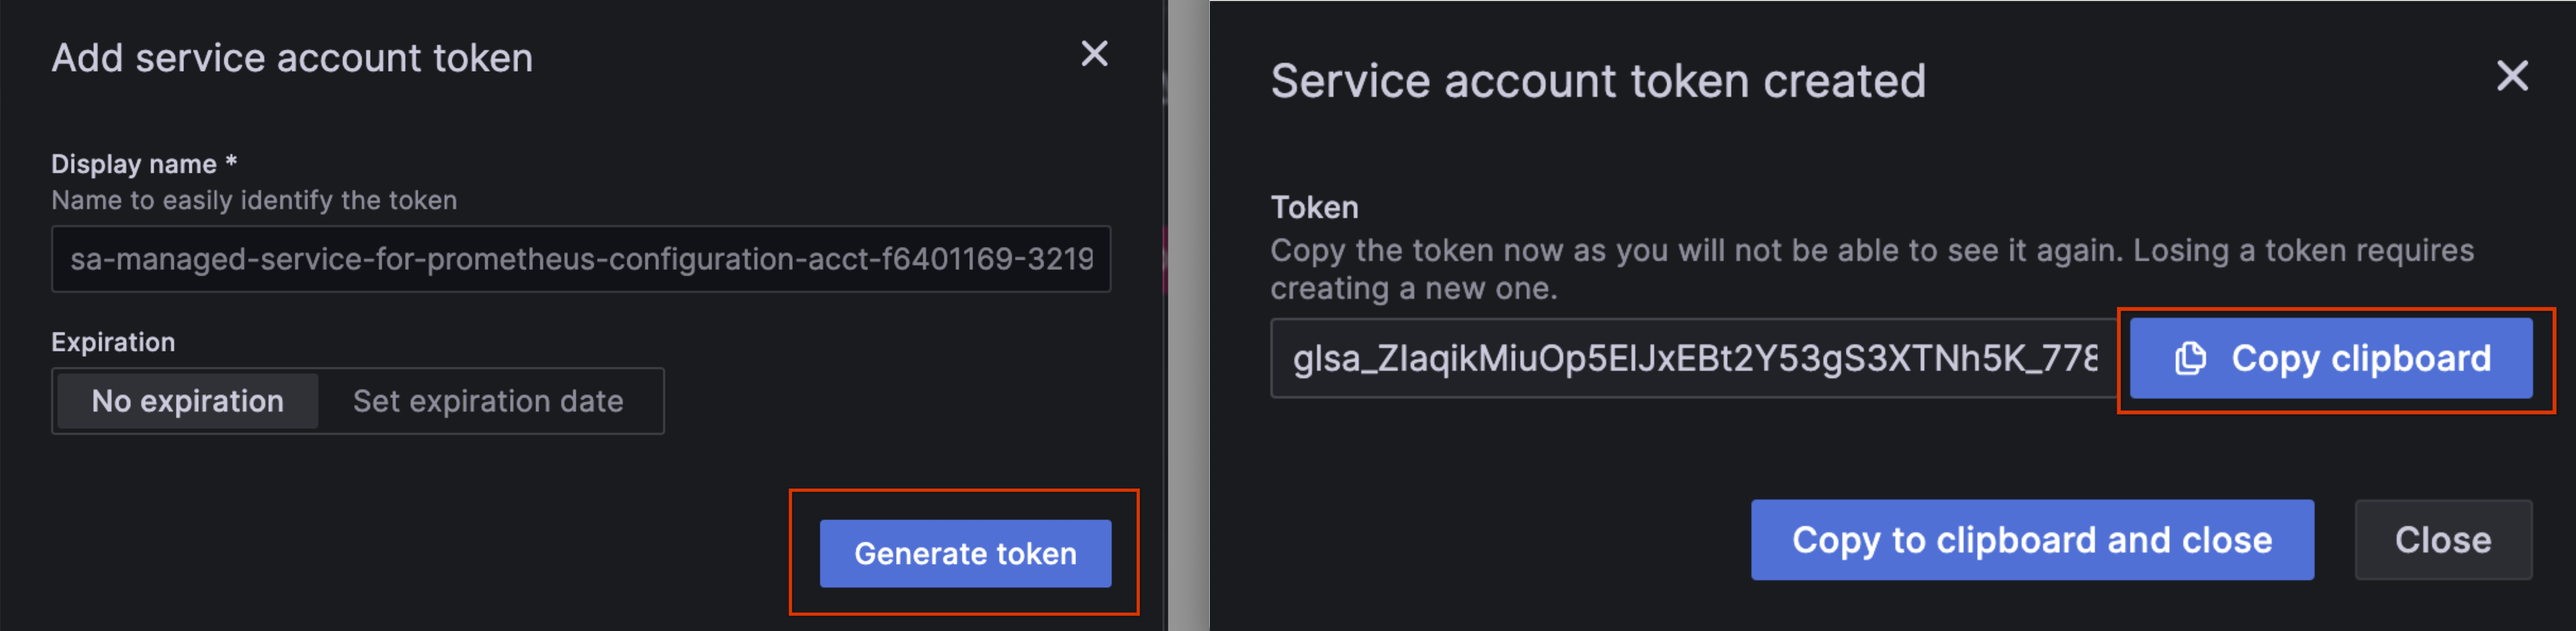 Generate and save a service account token in Grafana.